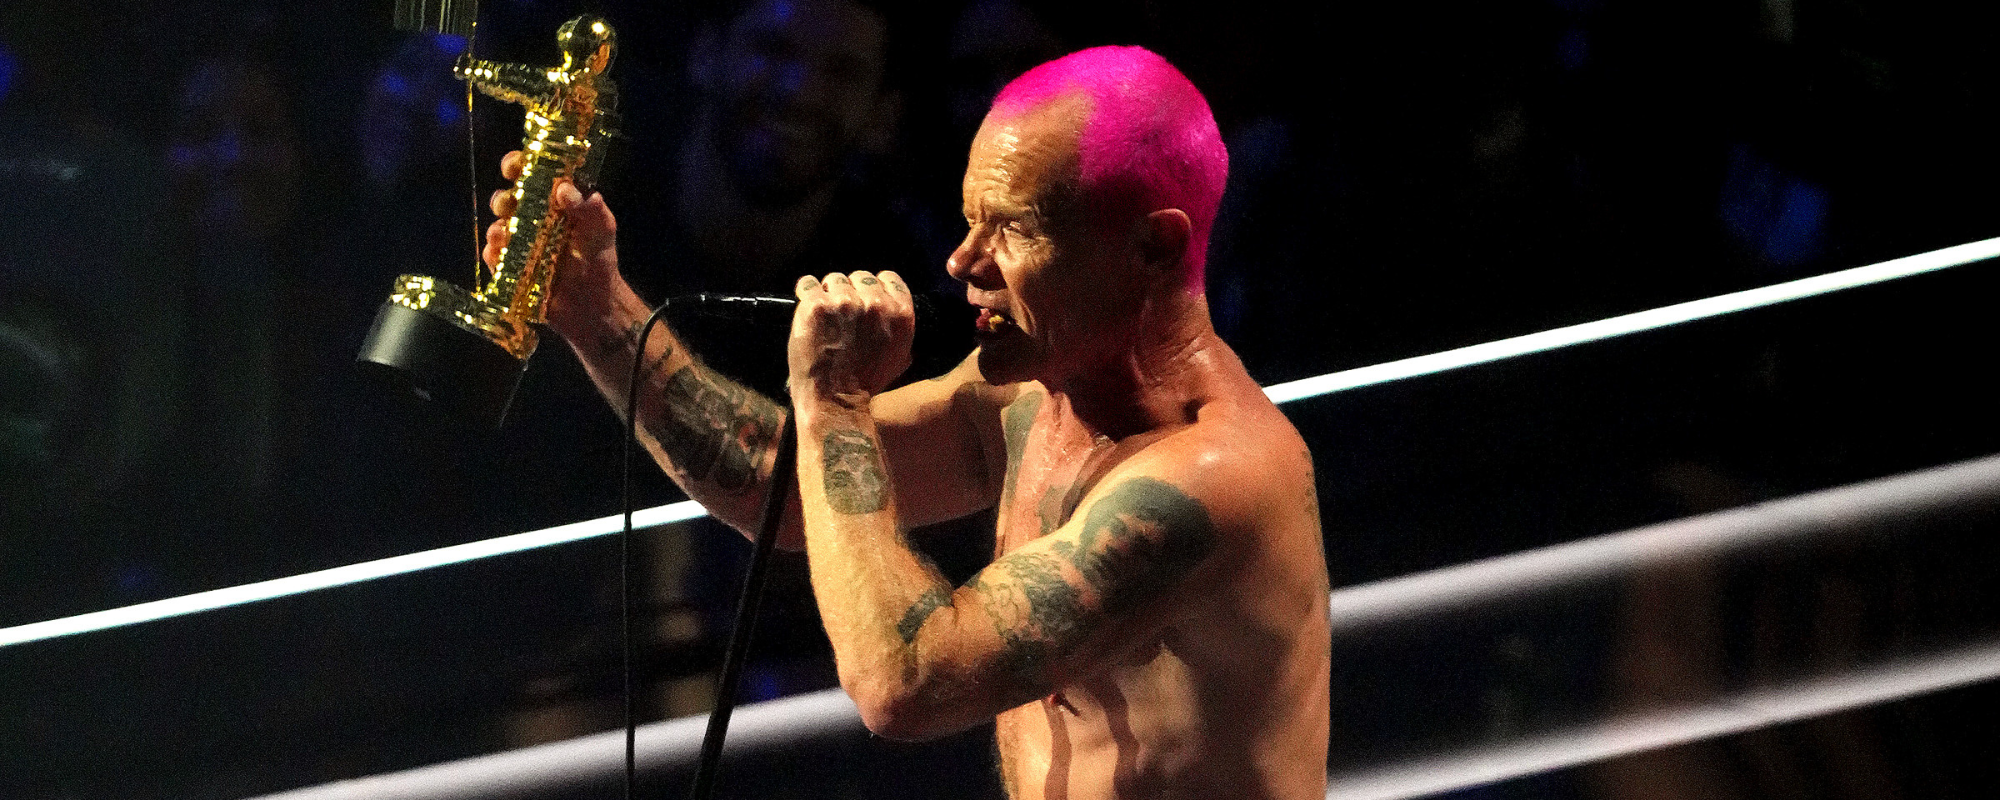 Songs You Didn’t Know Red Hot Chili Peppers Bassist Flea Played On